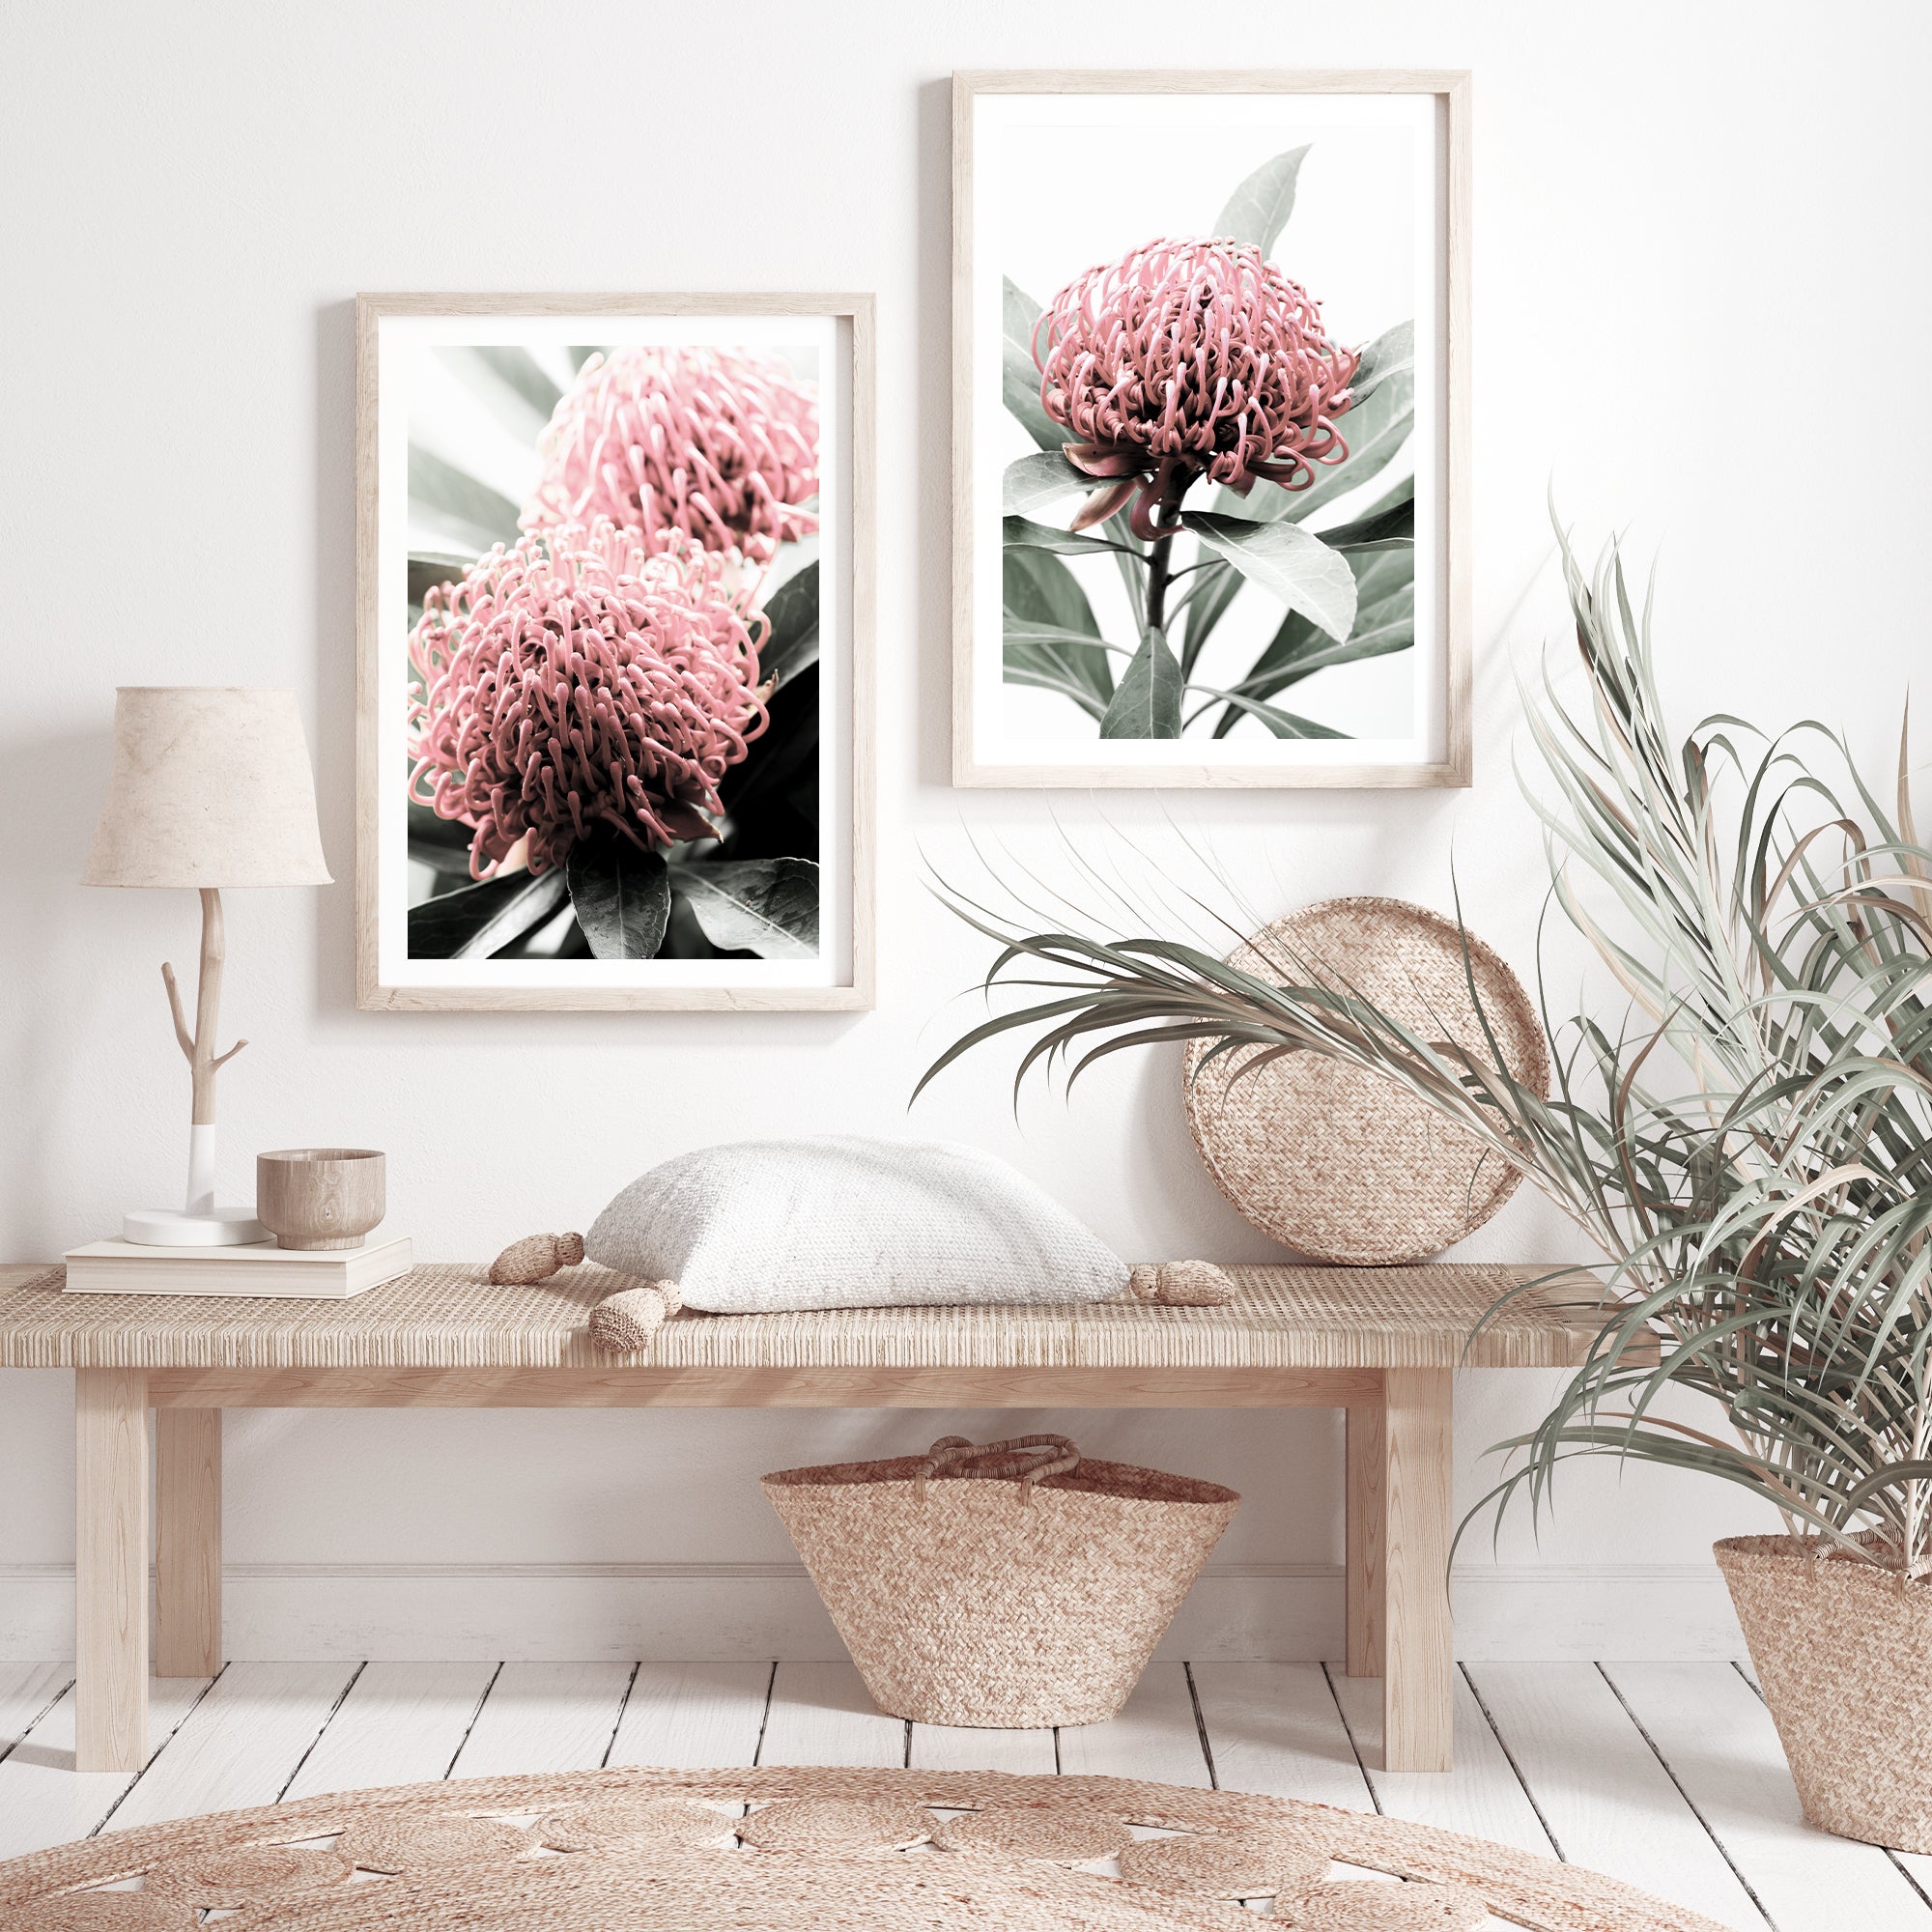 The beautiful reds and green of the Australian native Waratah flower is highlighted in this popular wall art set.